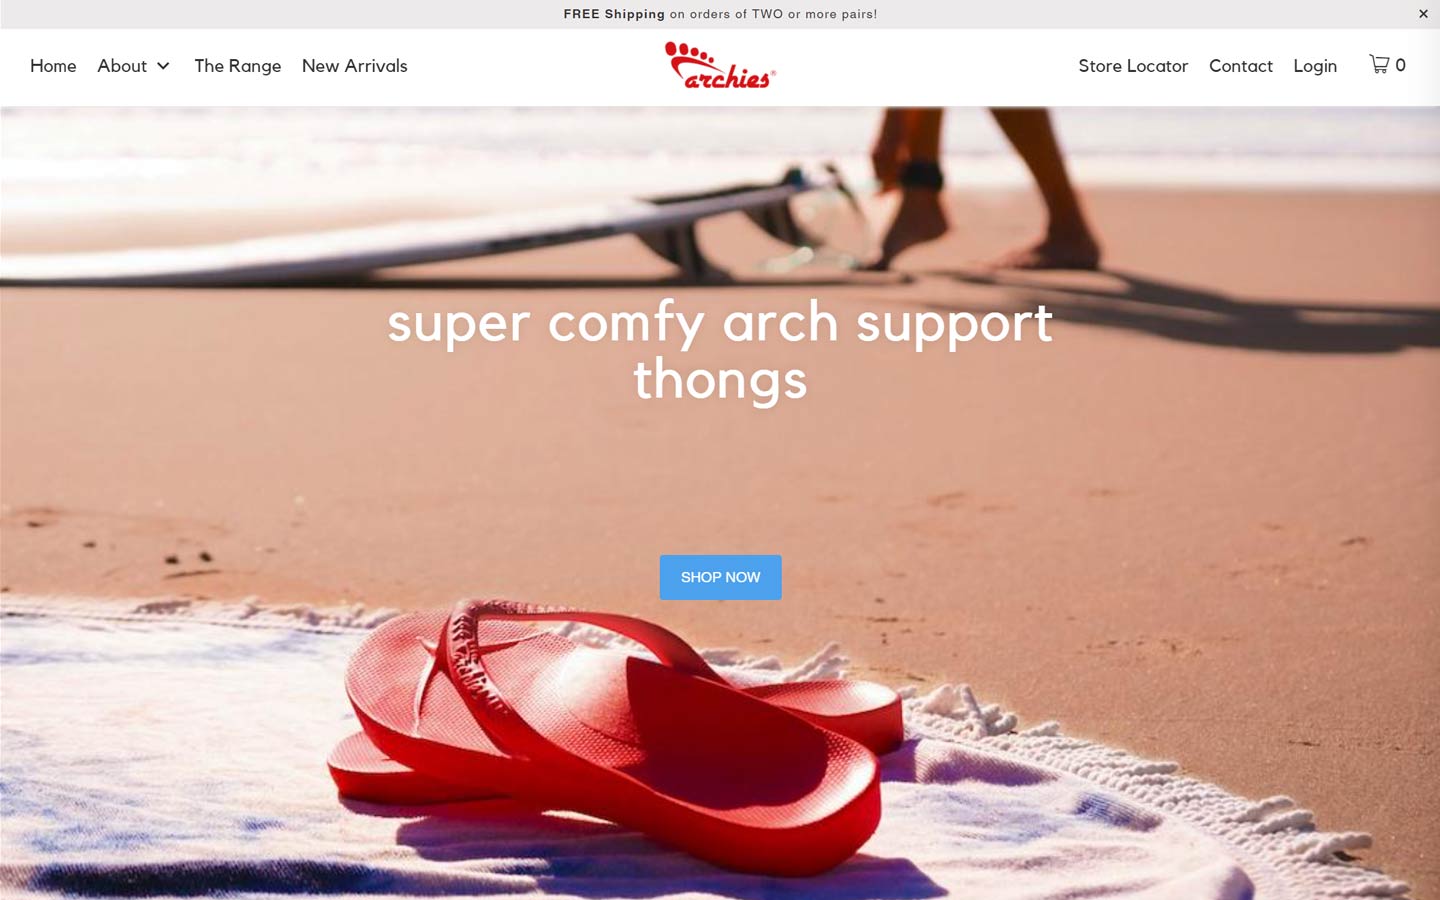 Archies Latest – Archies Footwear